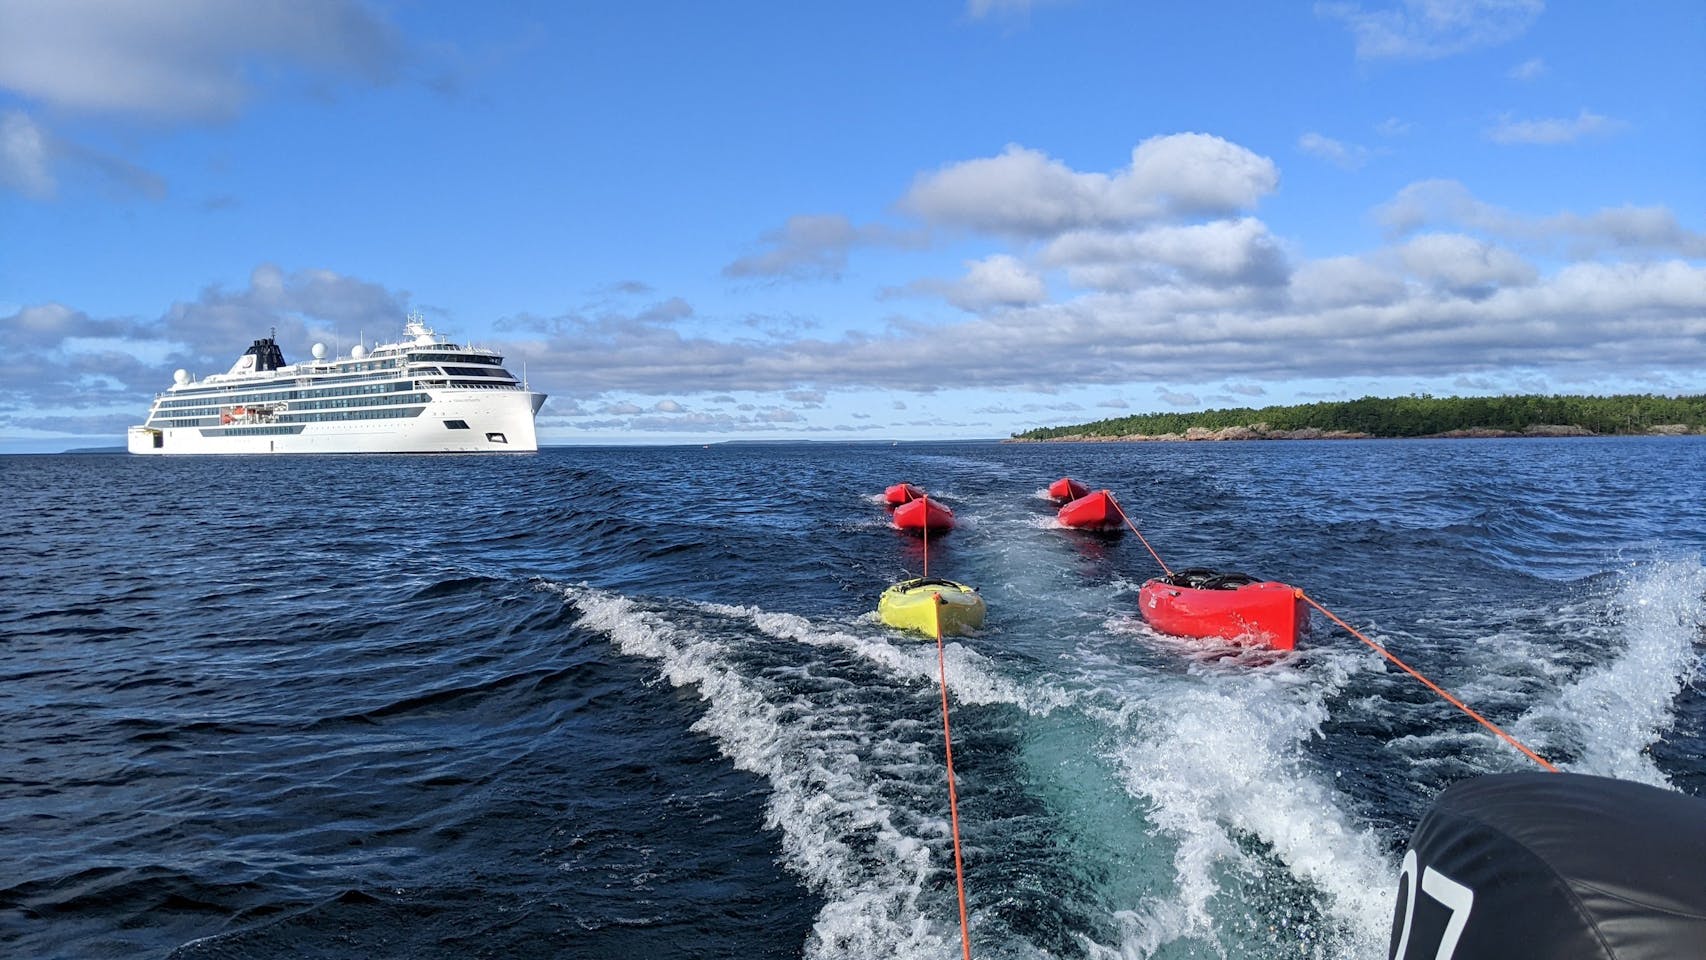 Kayaks trailed behind a Zodiac boat during an expedition from the cruise ship Viking Octantis in Lake Huron’s Georgian Bay near Killarney, Ontario.